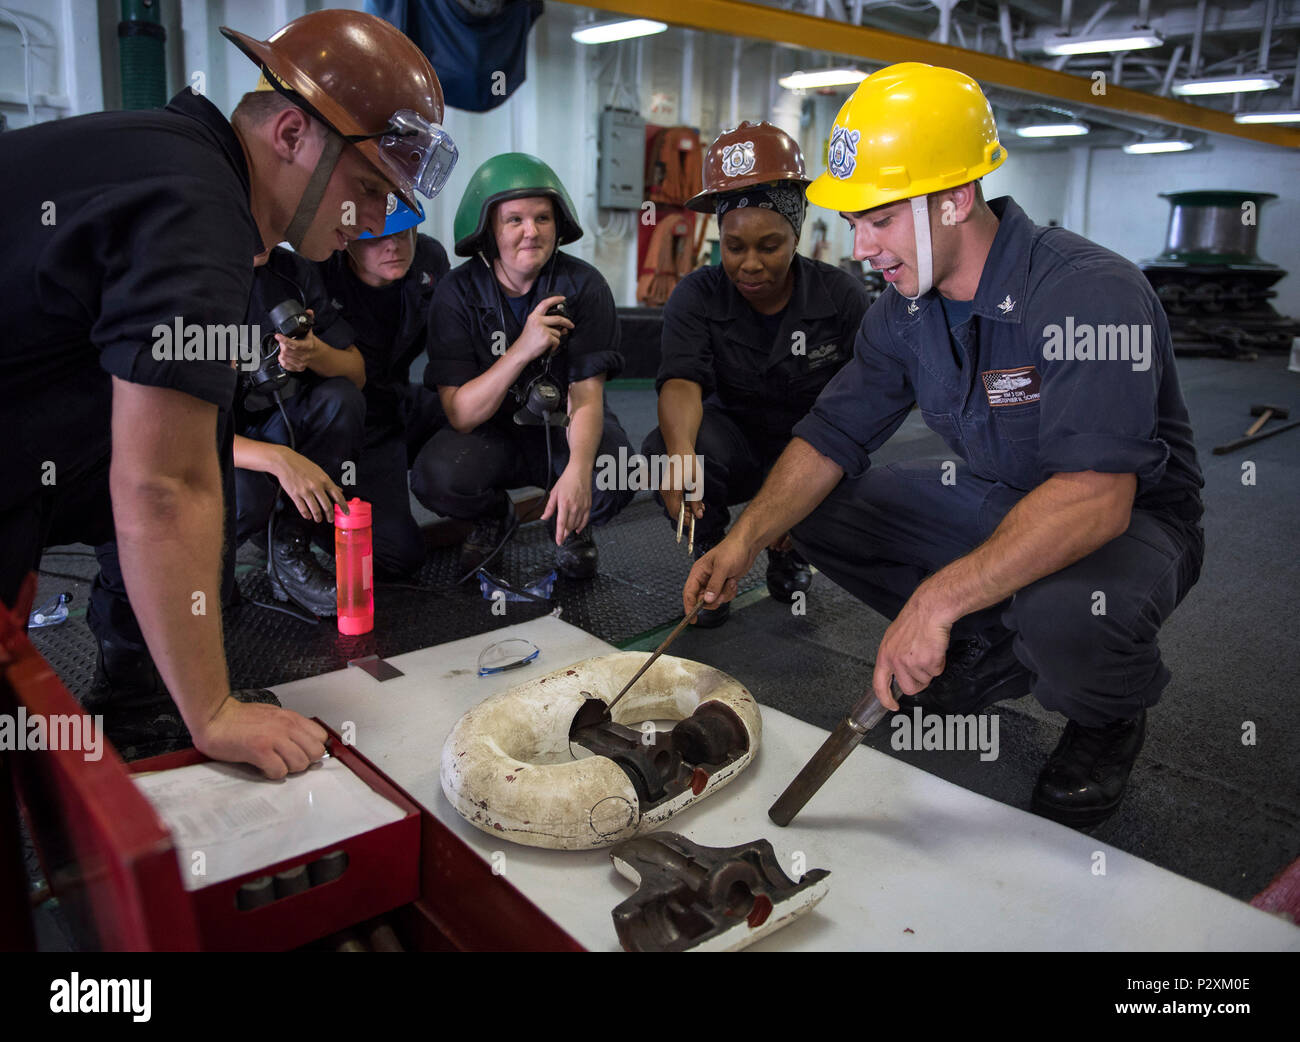 160808-N-WF272-025 SASEBO HARBOR (Aug. 8, 2016) Boatswain's Mate 3rd Class Christopher Schwall (far right), from Detroit, trains deck department Sailors on the components of a detachable link on the forecastle of amphibious assault ship USS Bonhomme Richard (LHD 6). Detachable links are used to join sections of anchor chain and are often painted white. Bonhomme Richard (BHR) is the flagship of the BHR Expeditionary Strike Group, is operating in the U.S. 7th Fleet area of operations in support of security and stability in the Indo-Asia-Pacific region. (U.S. Navy photo by Mass Communication Spec Stock Photo